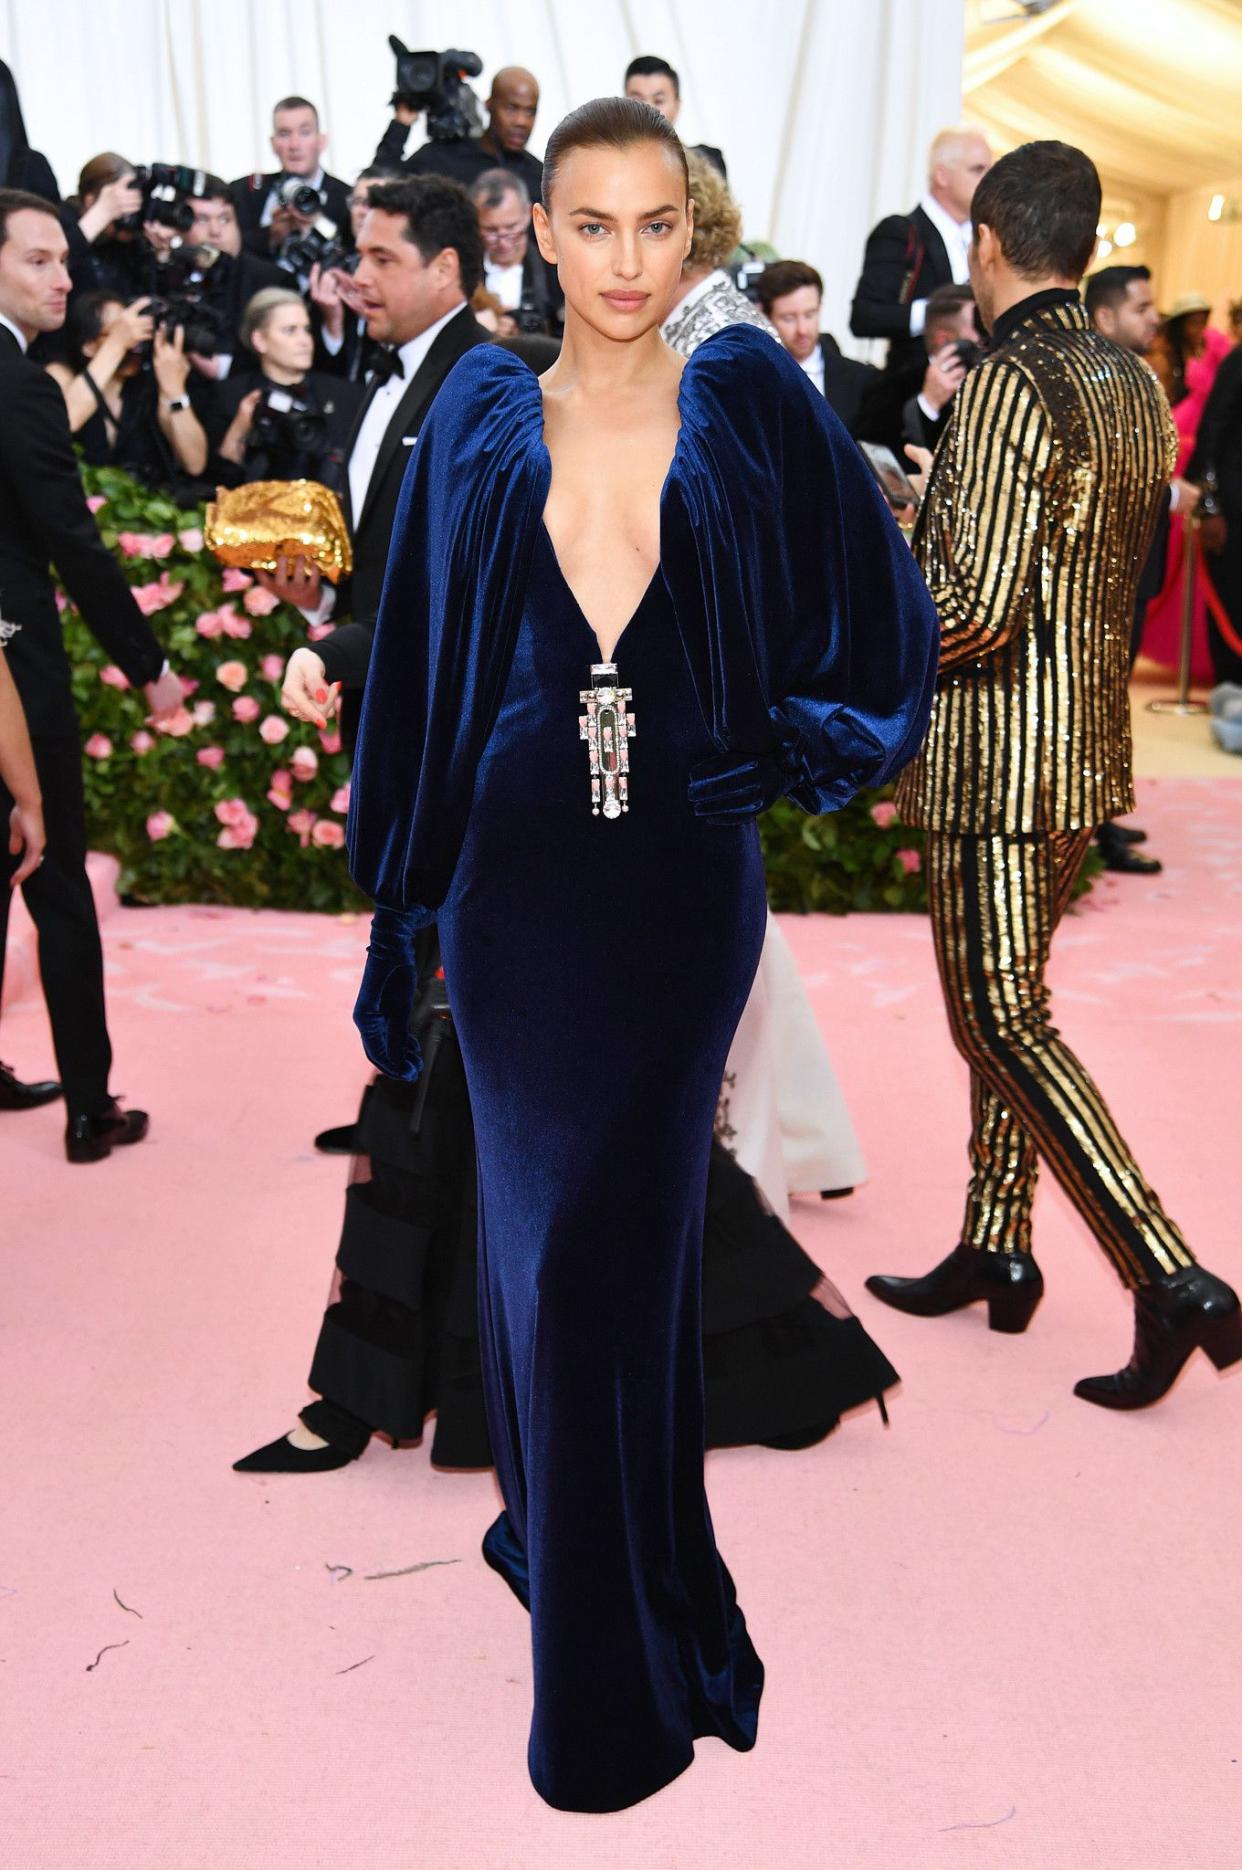 Irina Shayk attends The 2019 Met Gala Celebrating Camp: Notes on Fashion at Metropolitan Museum of Art on May 06, 2019 in New York City.